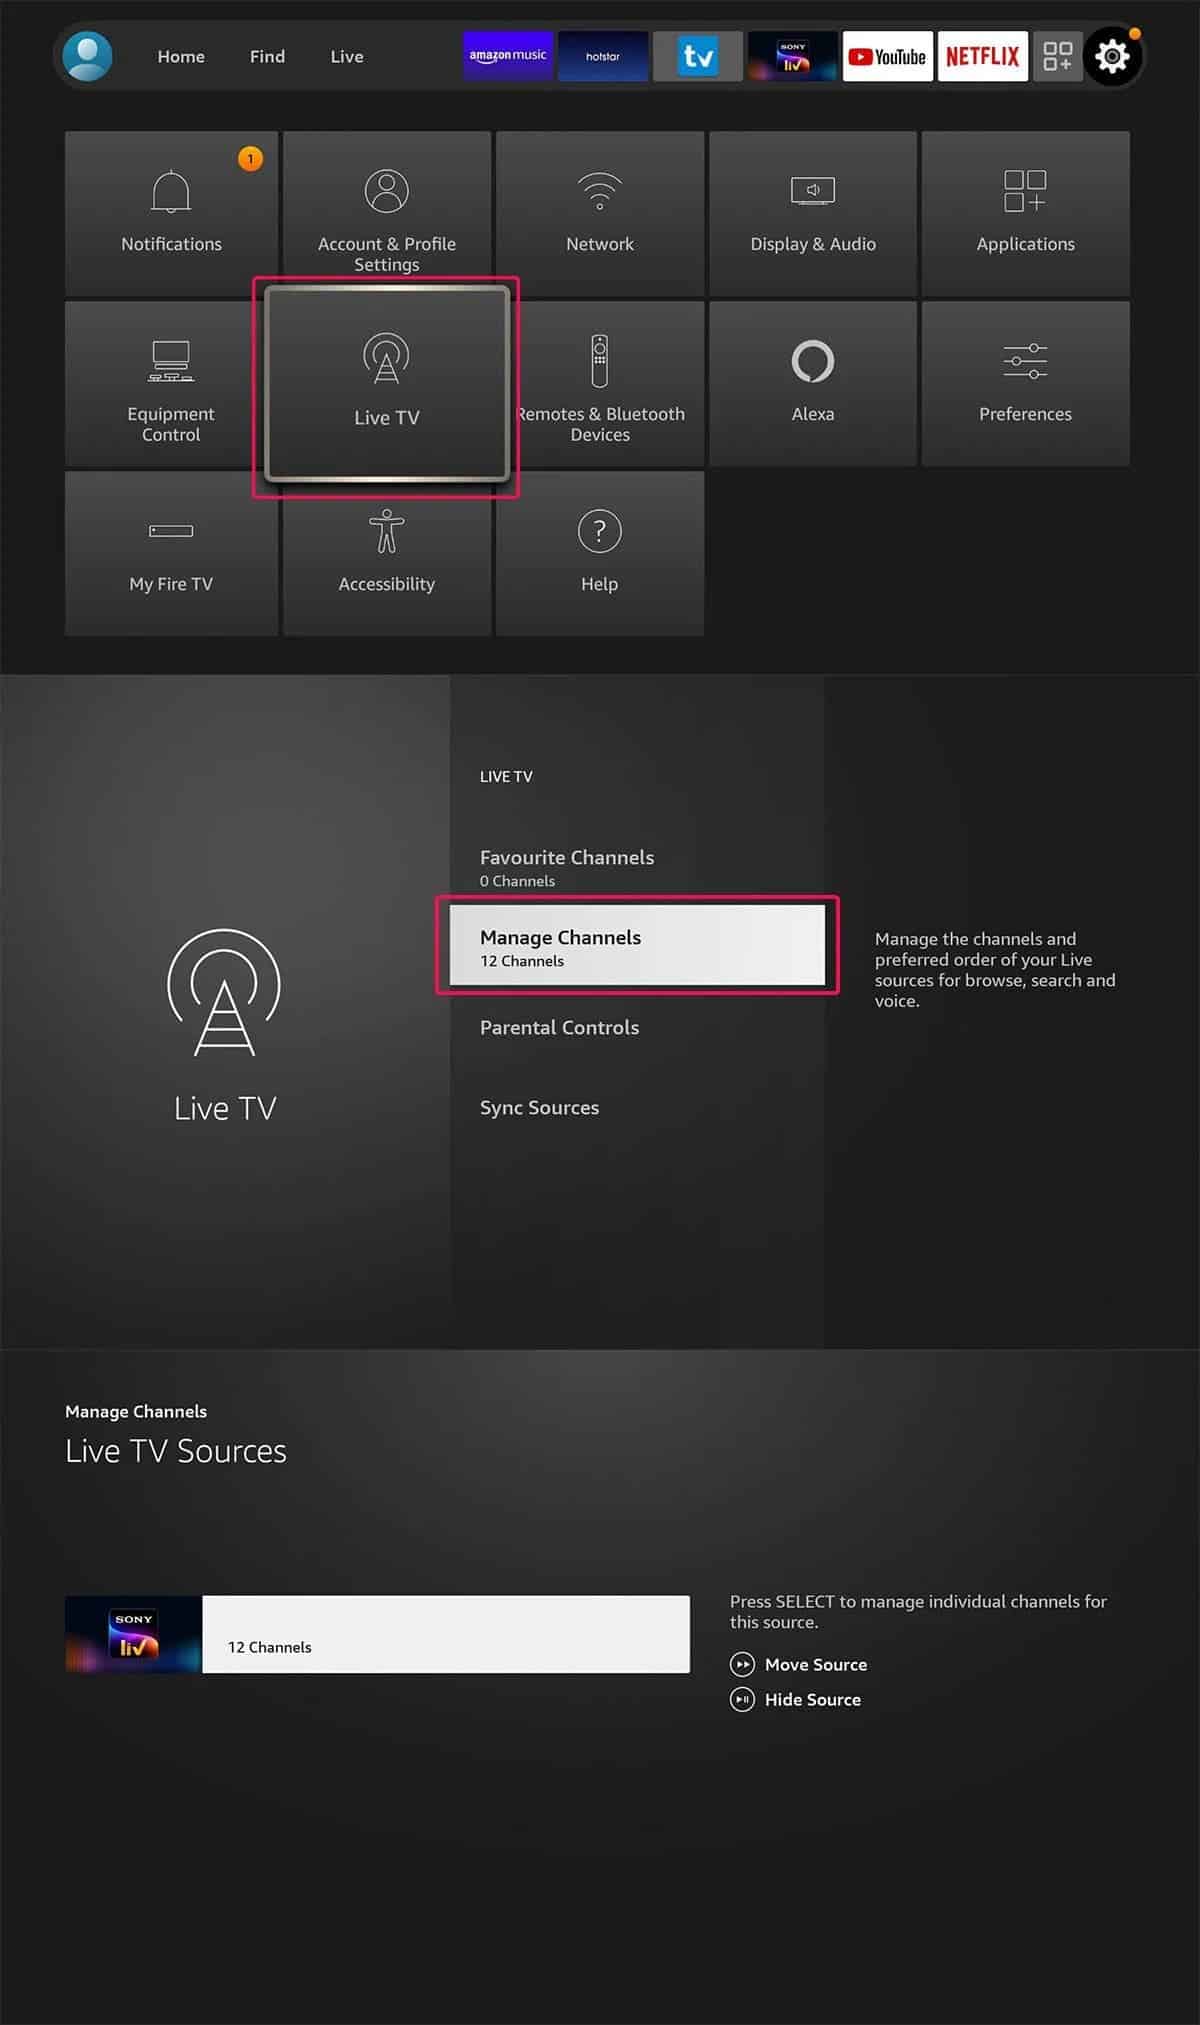 How to collect all live TV channels in one place on Fire TV